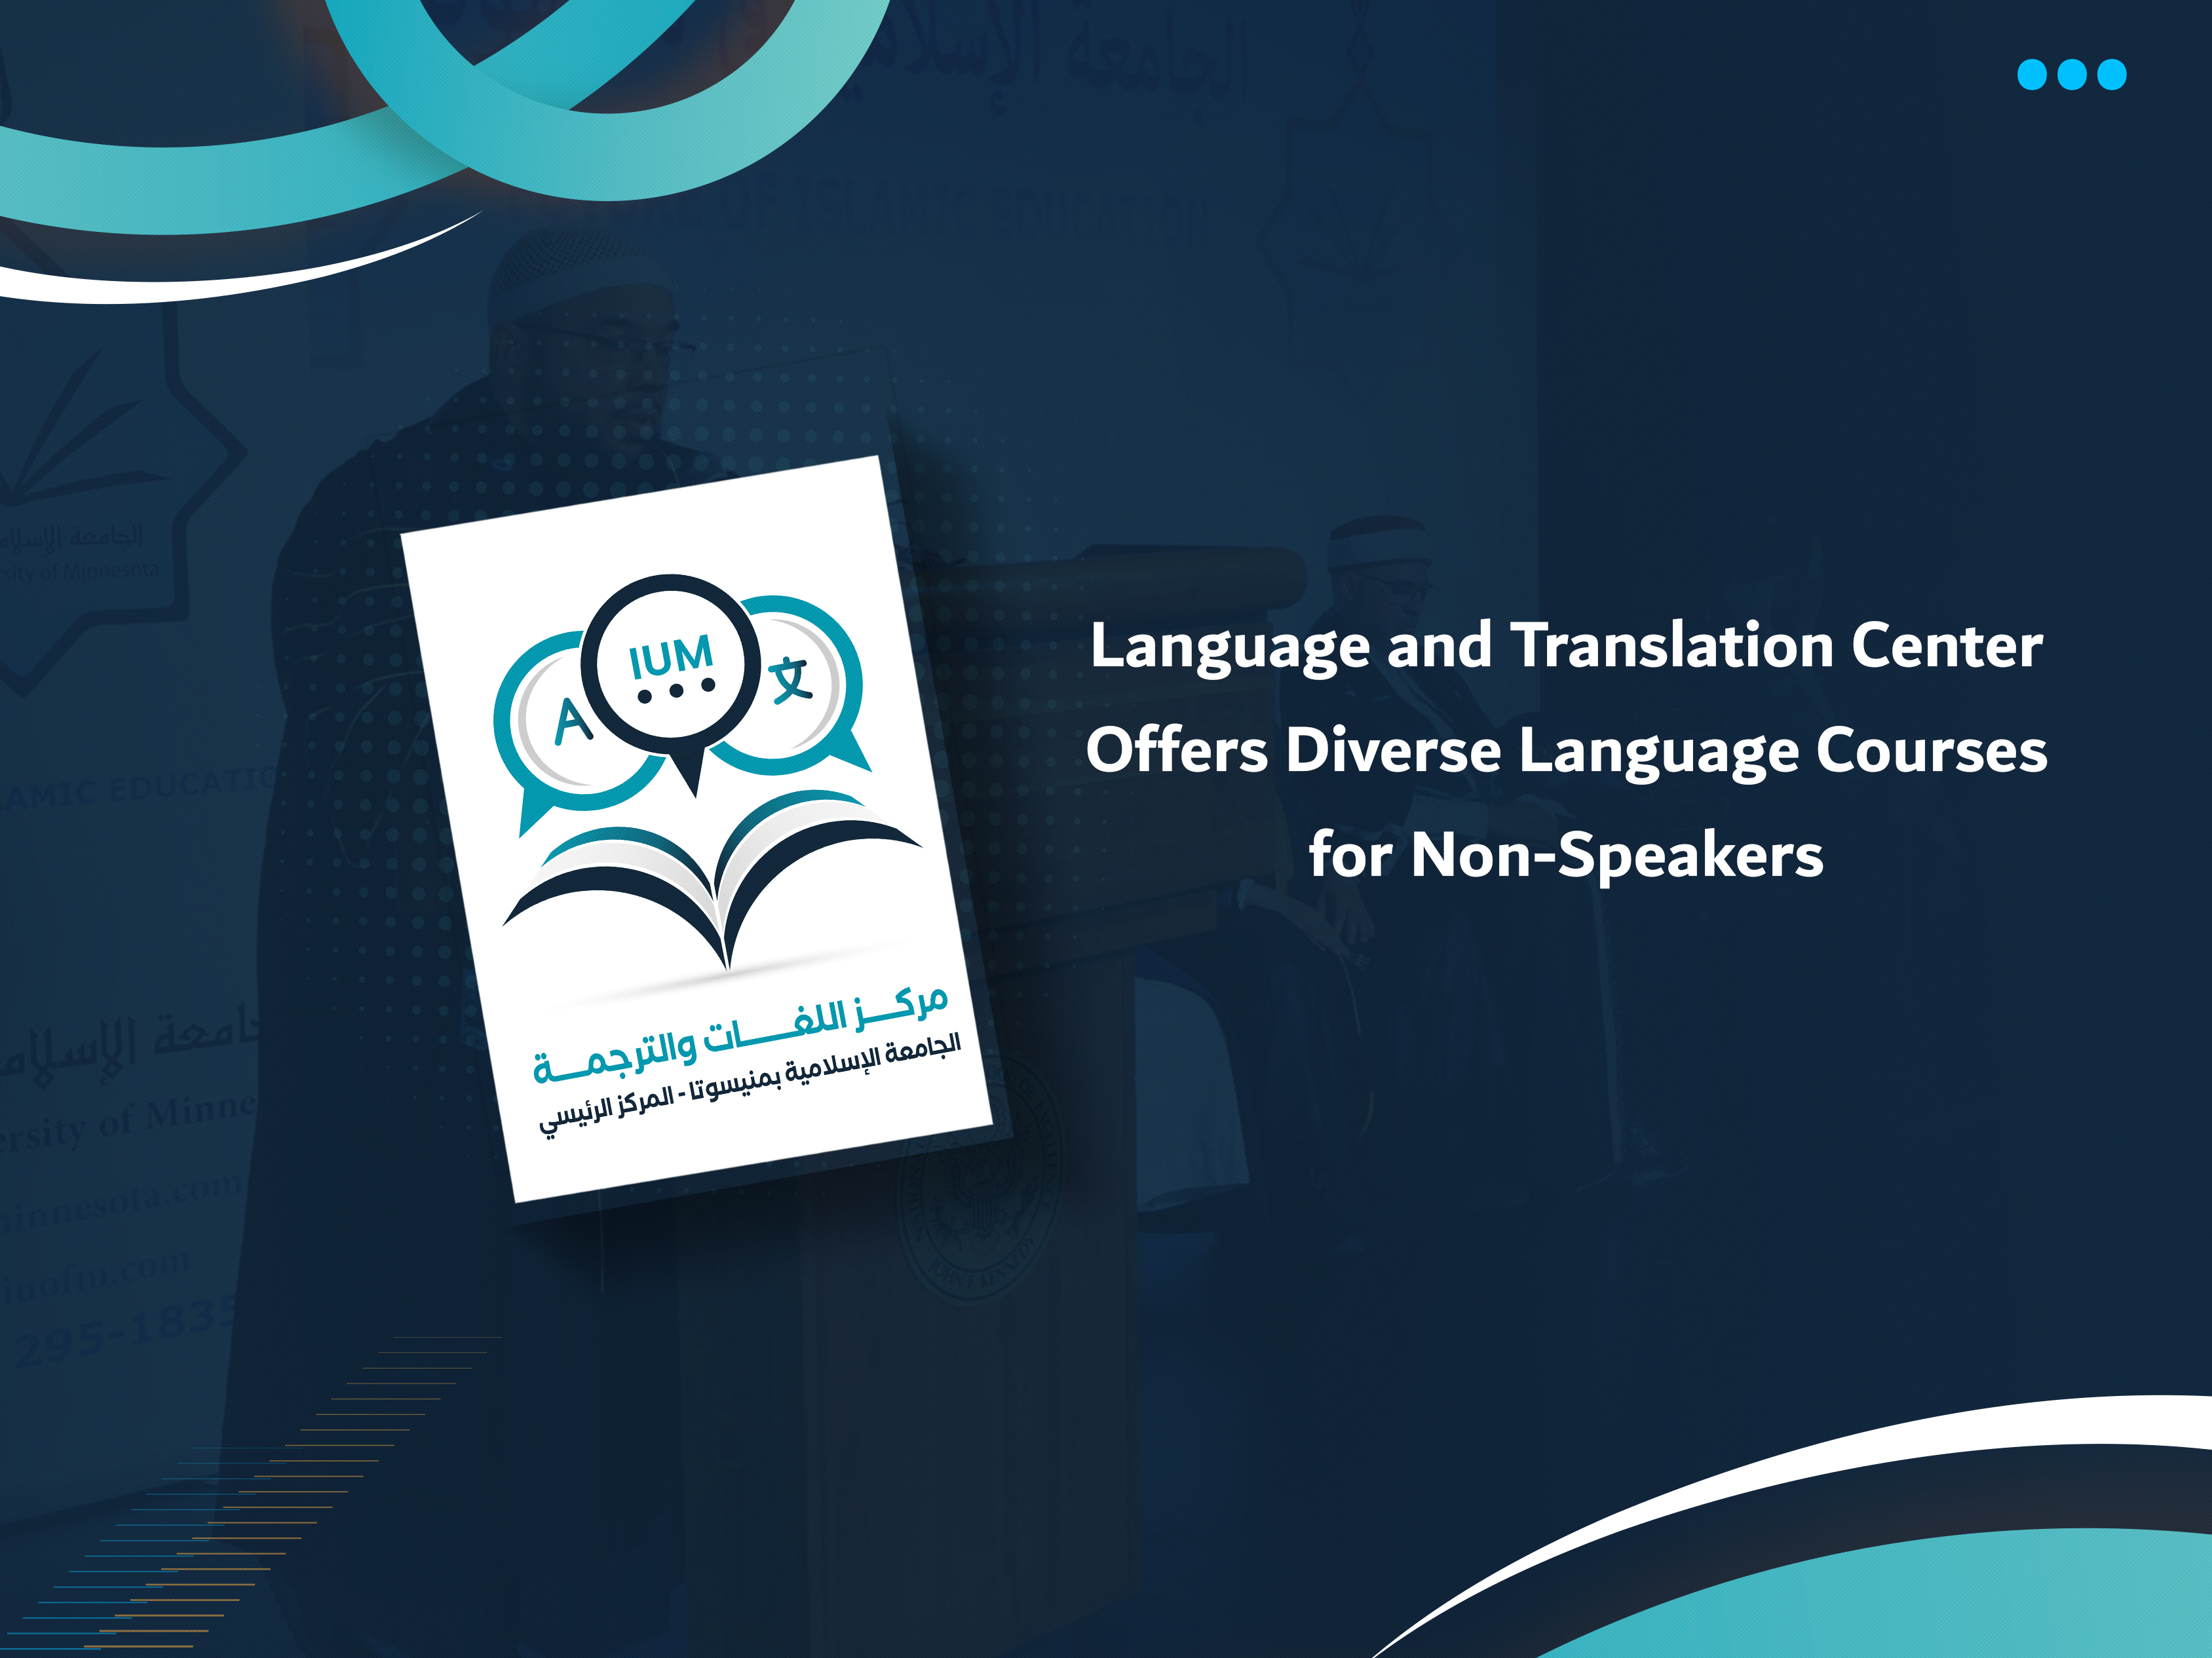 Language and Translation Center Offers Diverse Language Courses for Non-Speakers